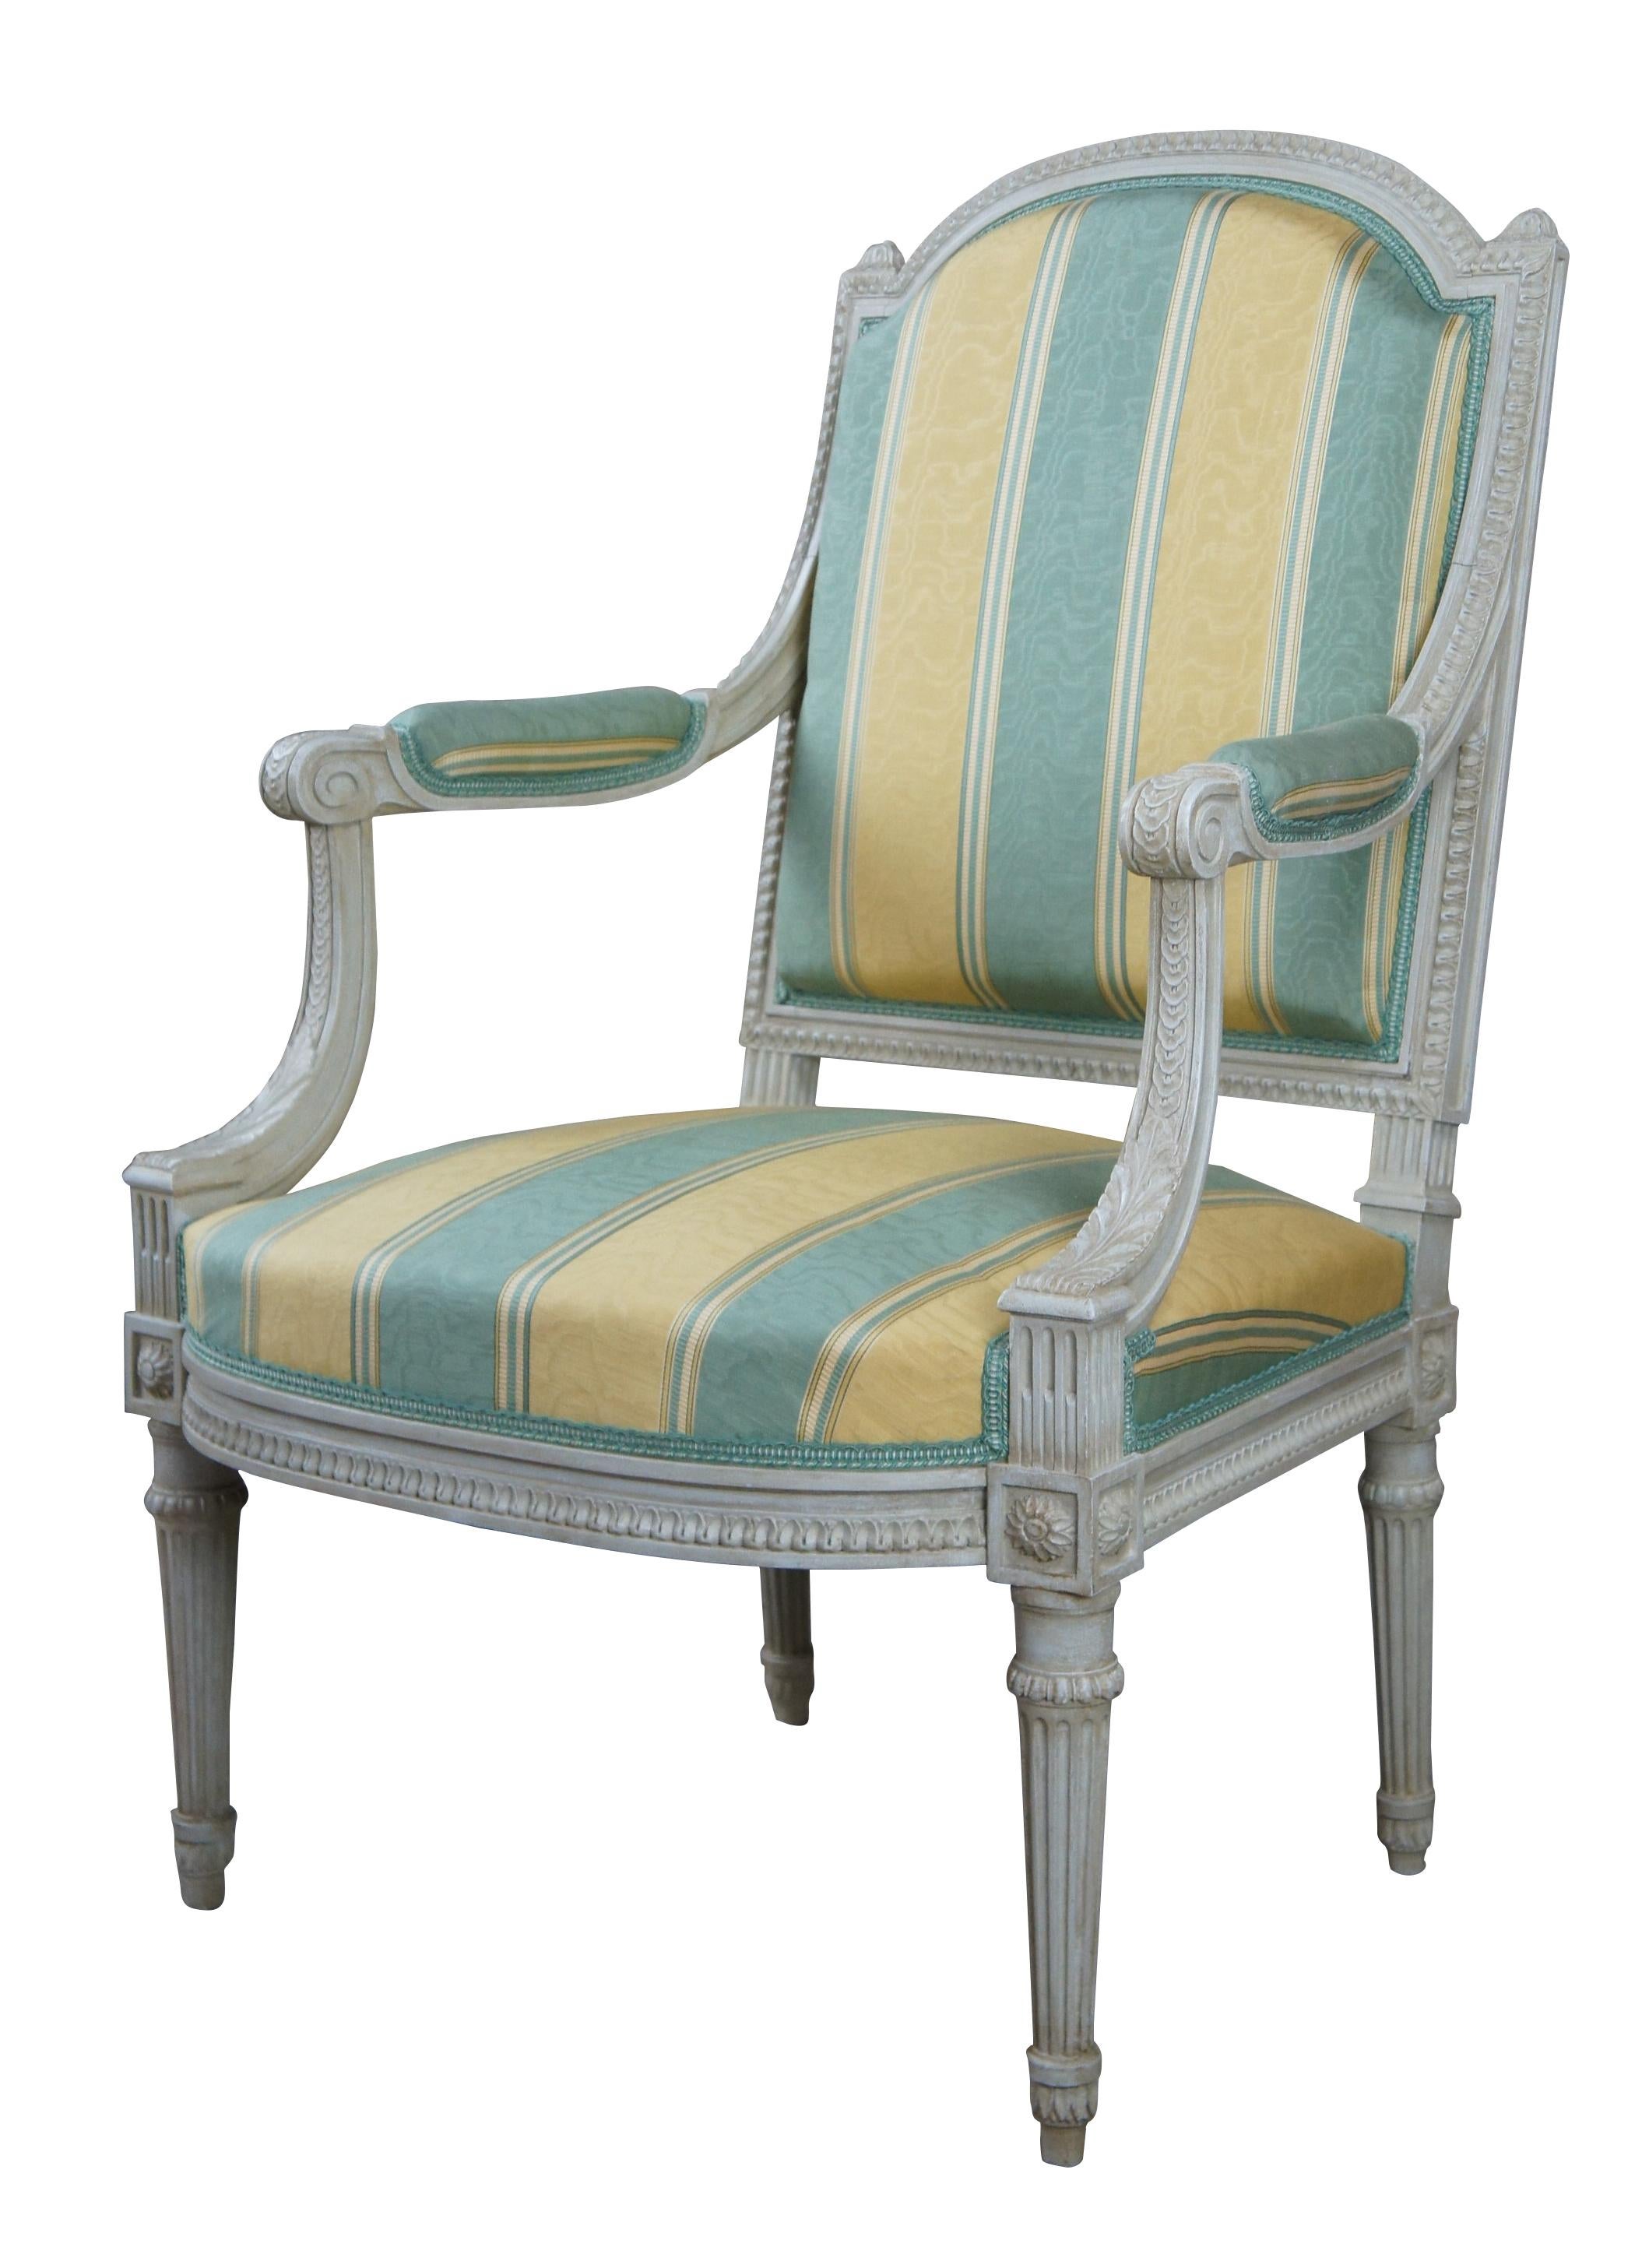 Vintage Baker Furniture French Louis XVI Fauteuil Silk Striped Arm Chair In Good Condition For Sale In Dayton, OH